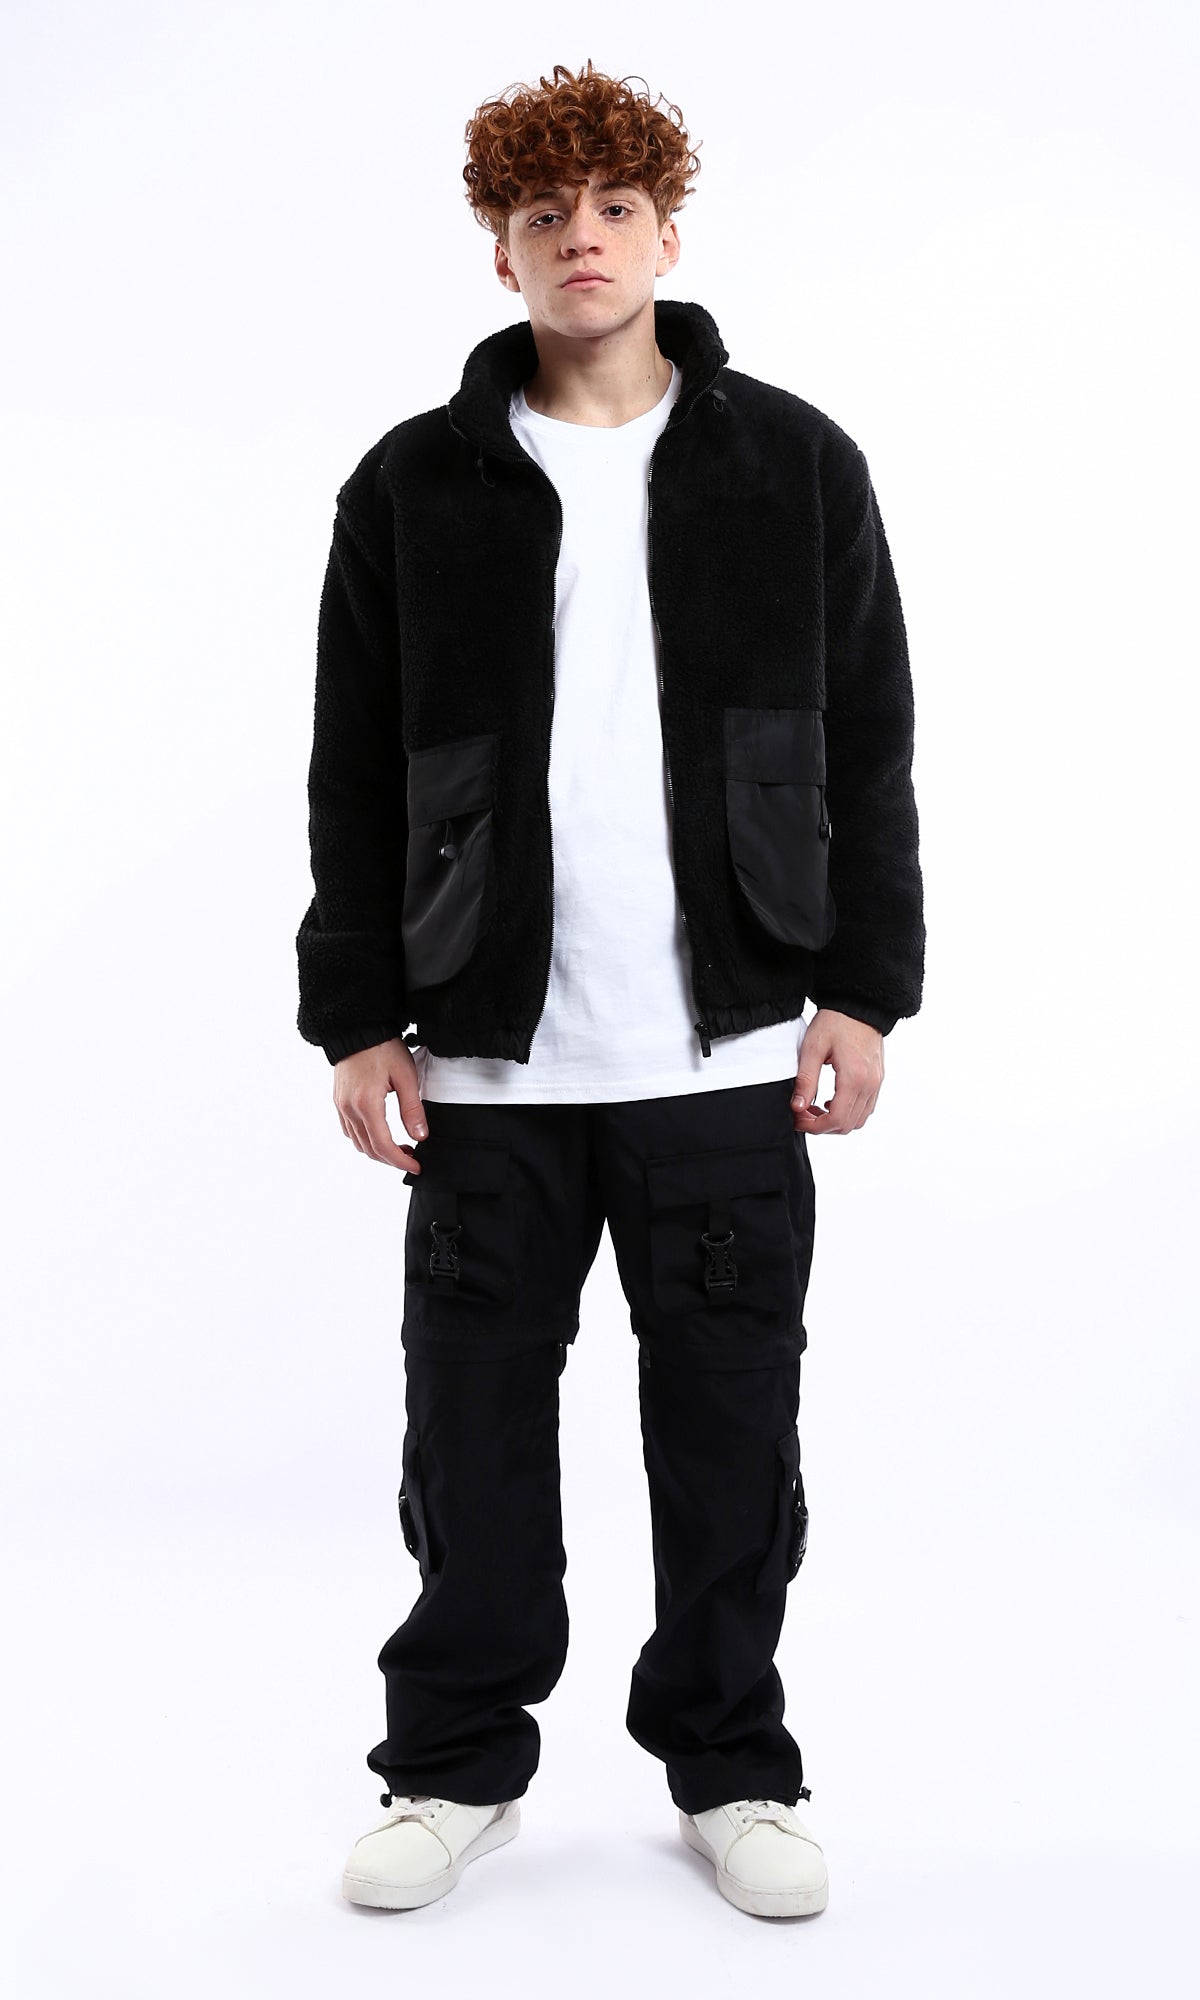 O174754 Black Wool Jacket With Adjustable Stand Collar